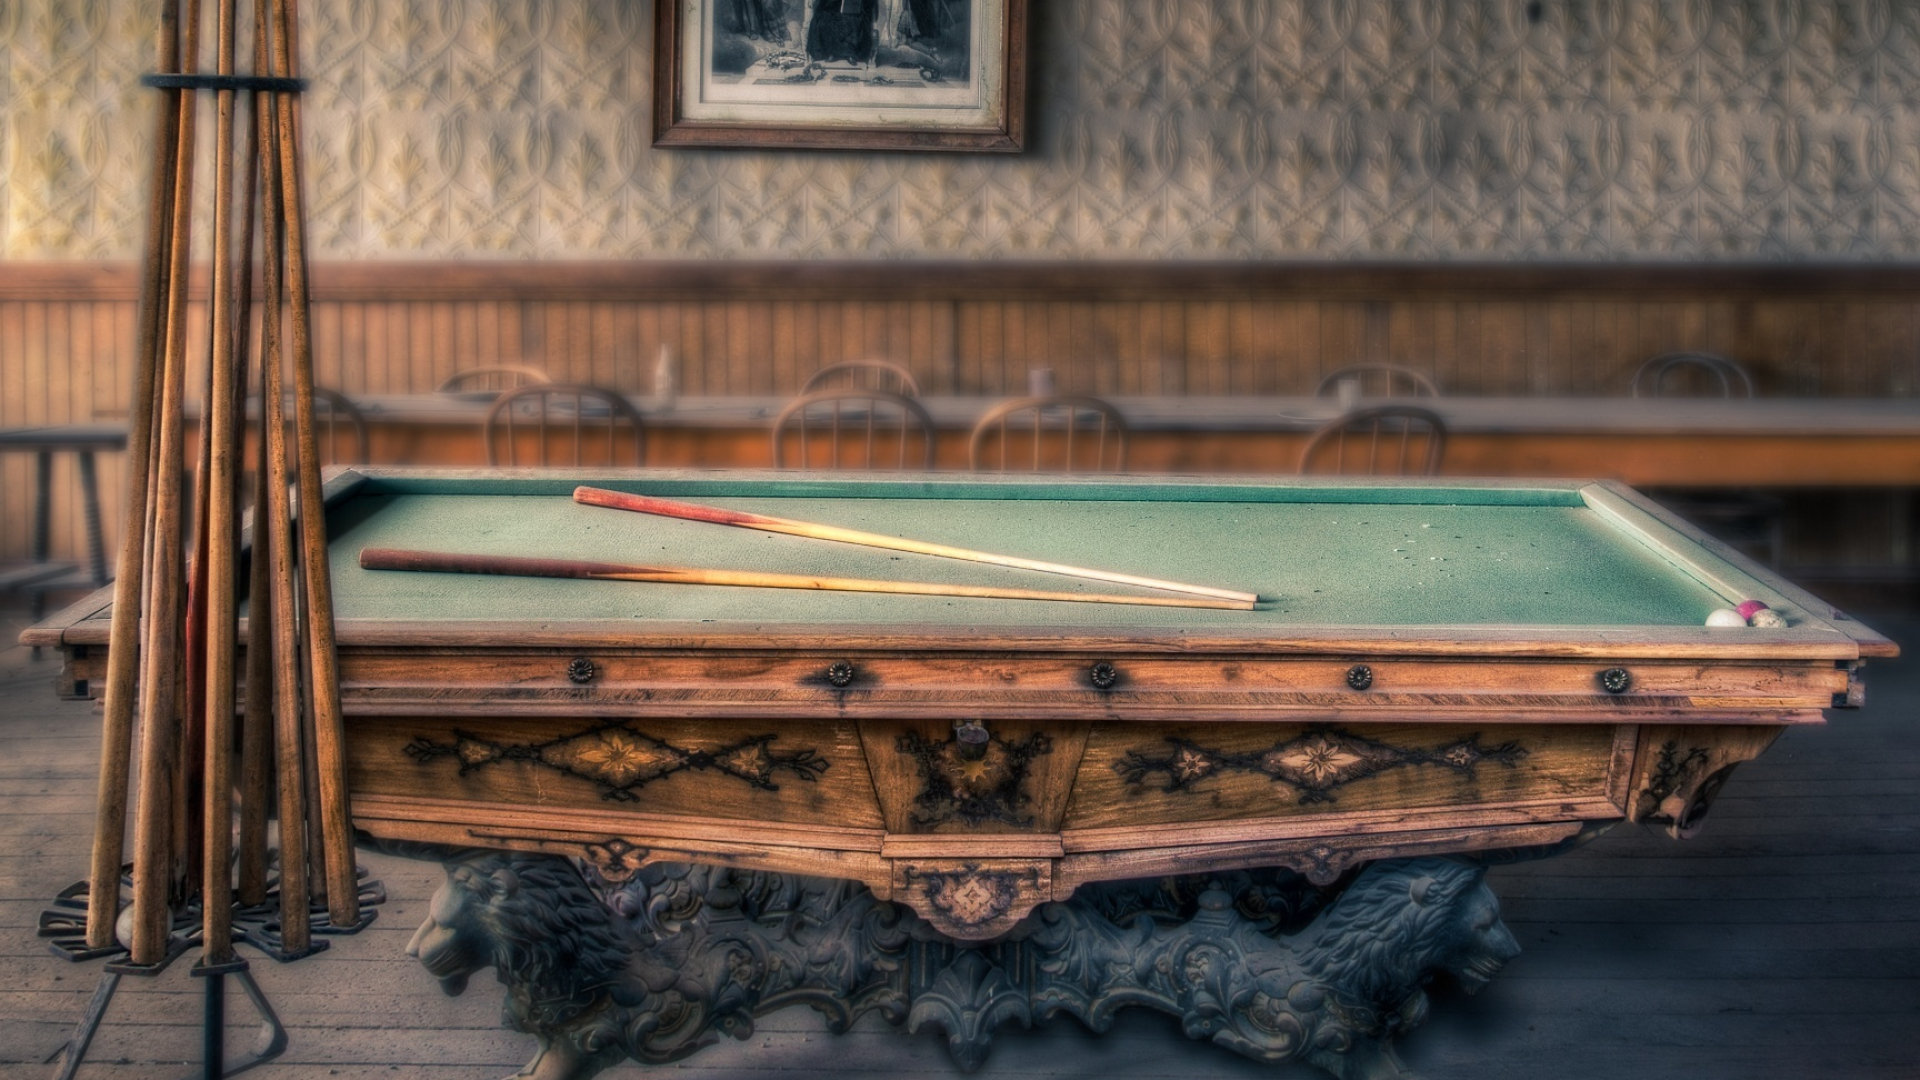 Billiards: Retro-style hand-made table for playing carom - a style of сue sports played without drop pockets. 1920x1080 Full HD Background.